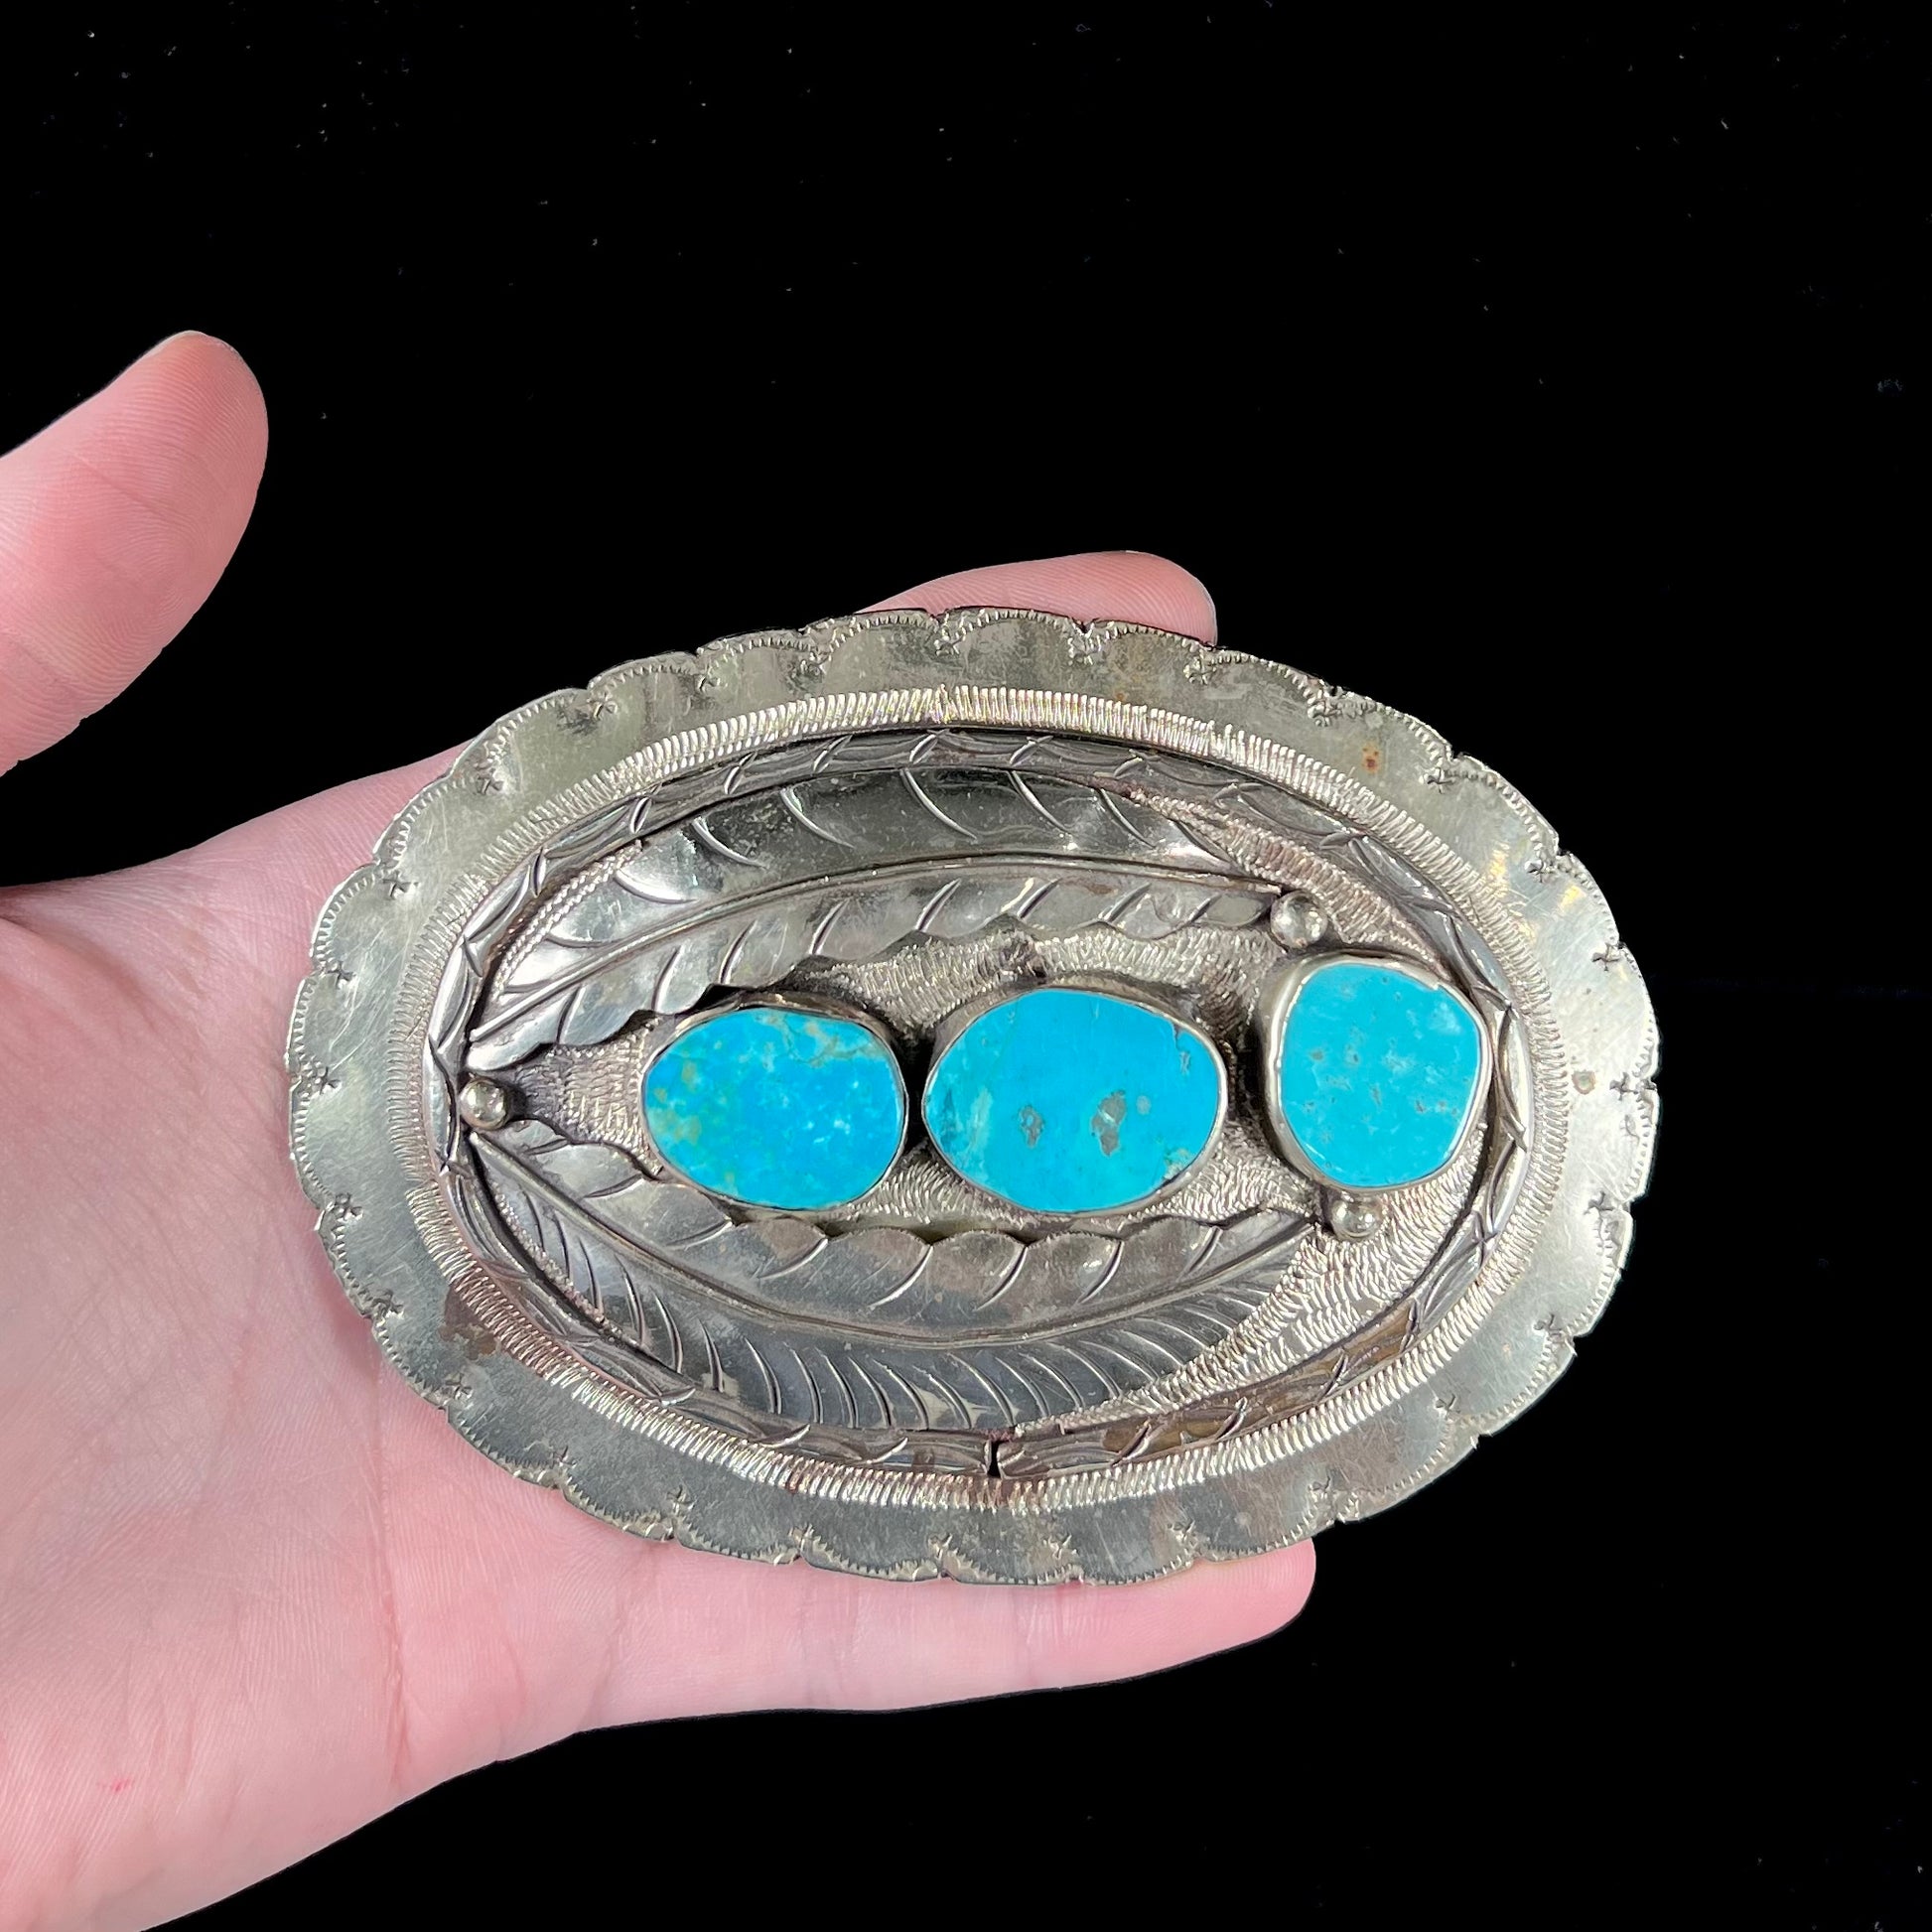 A vintage men's Navajo-made three stone turquoise belt buckle.  The belt buckle is base metal and has a feather design.